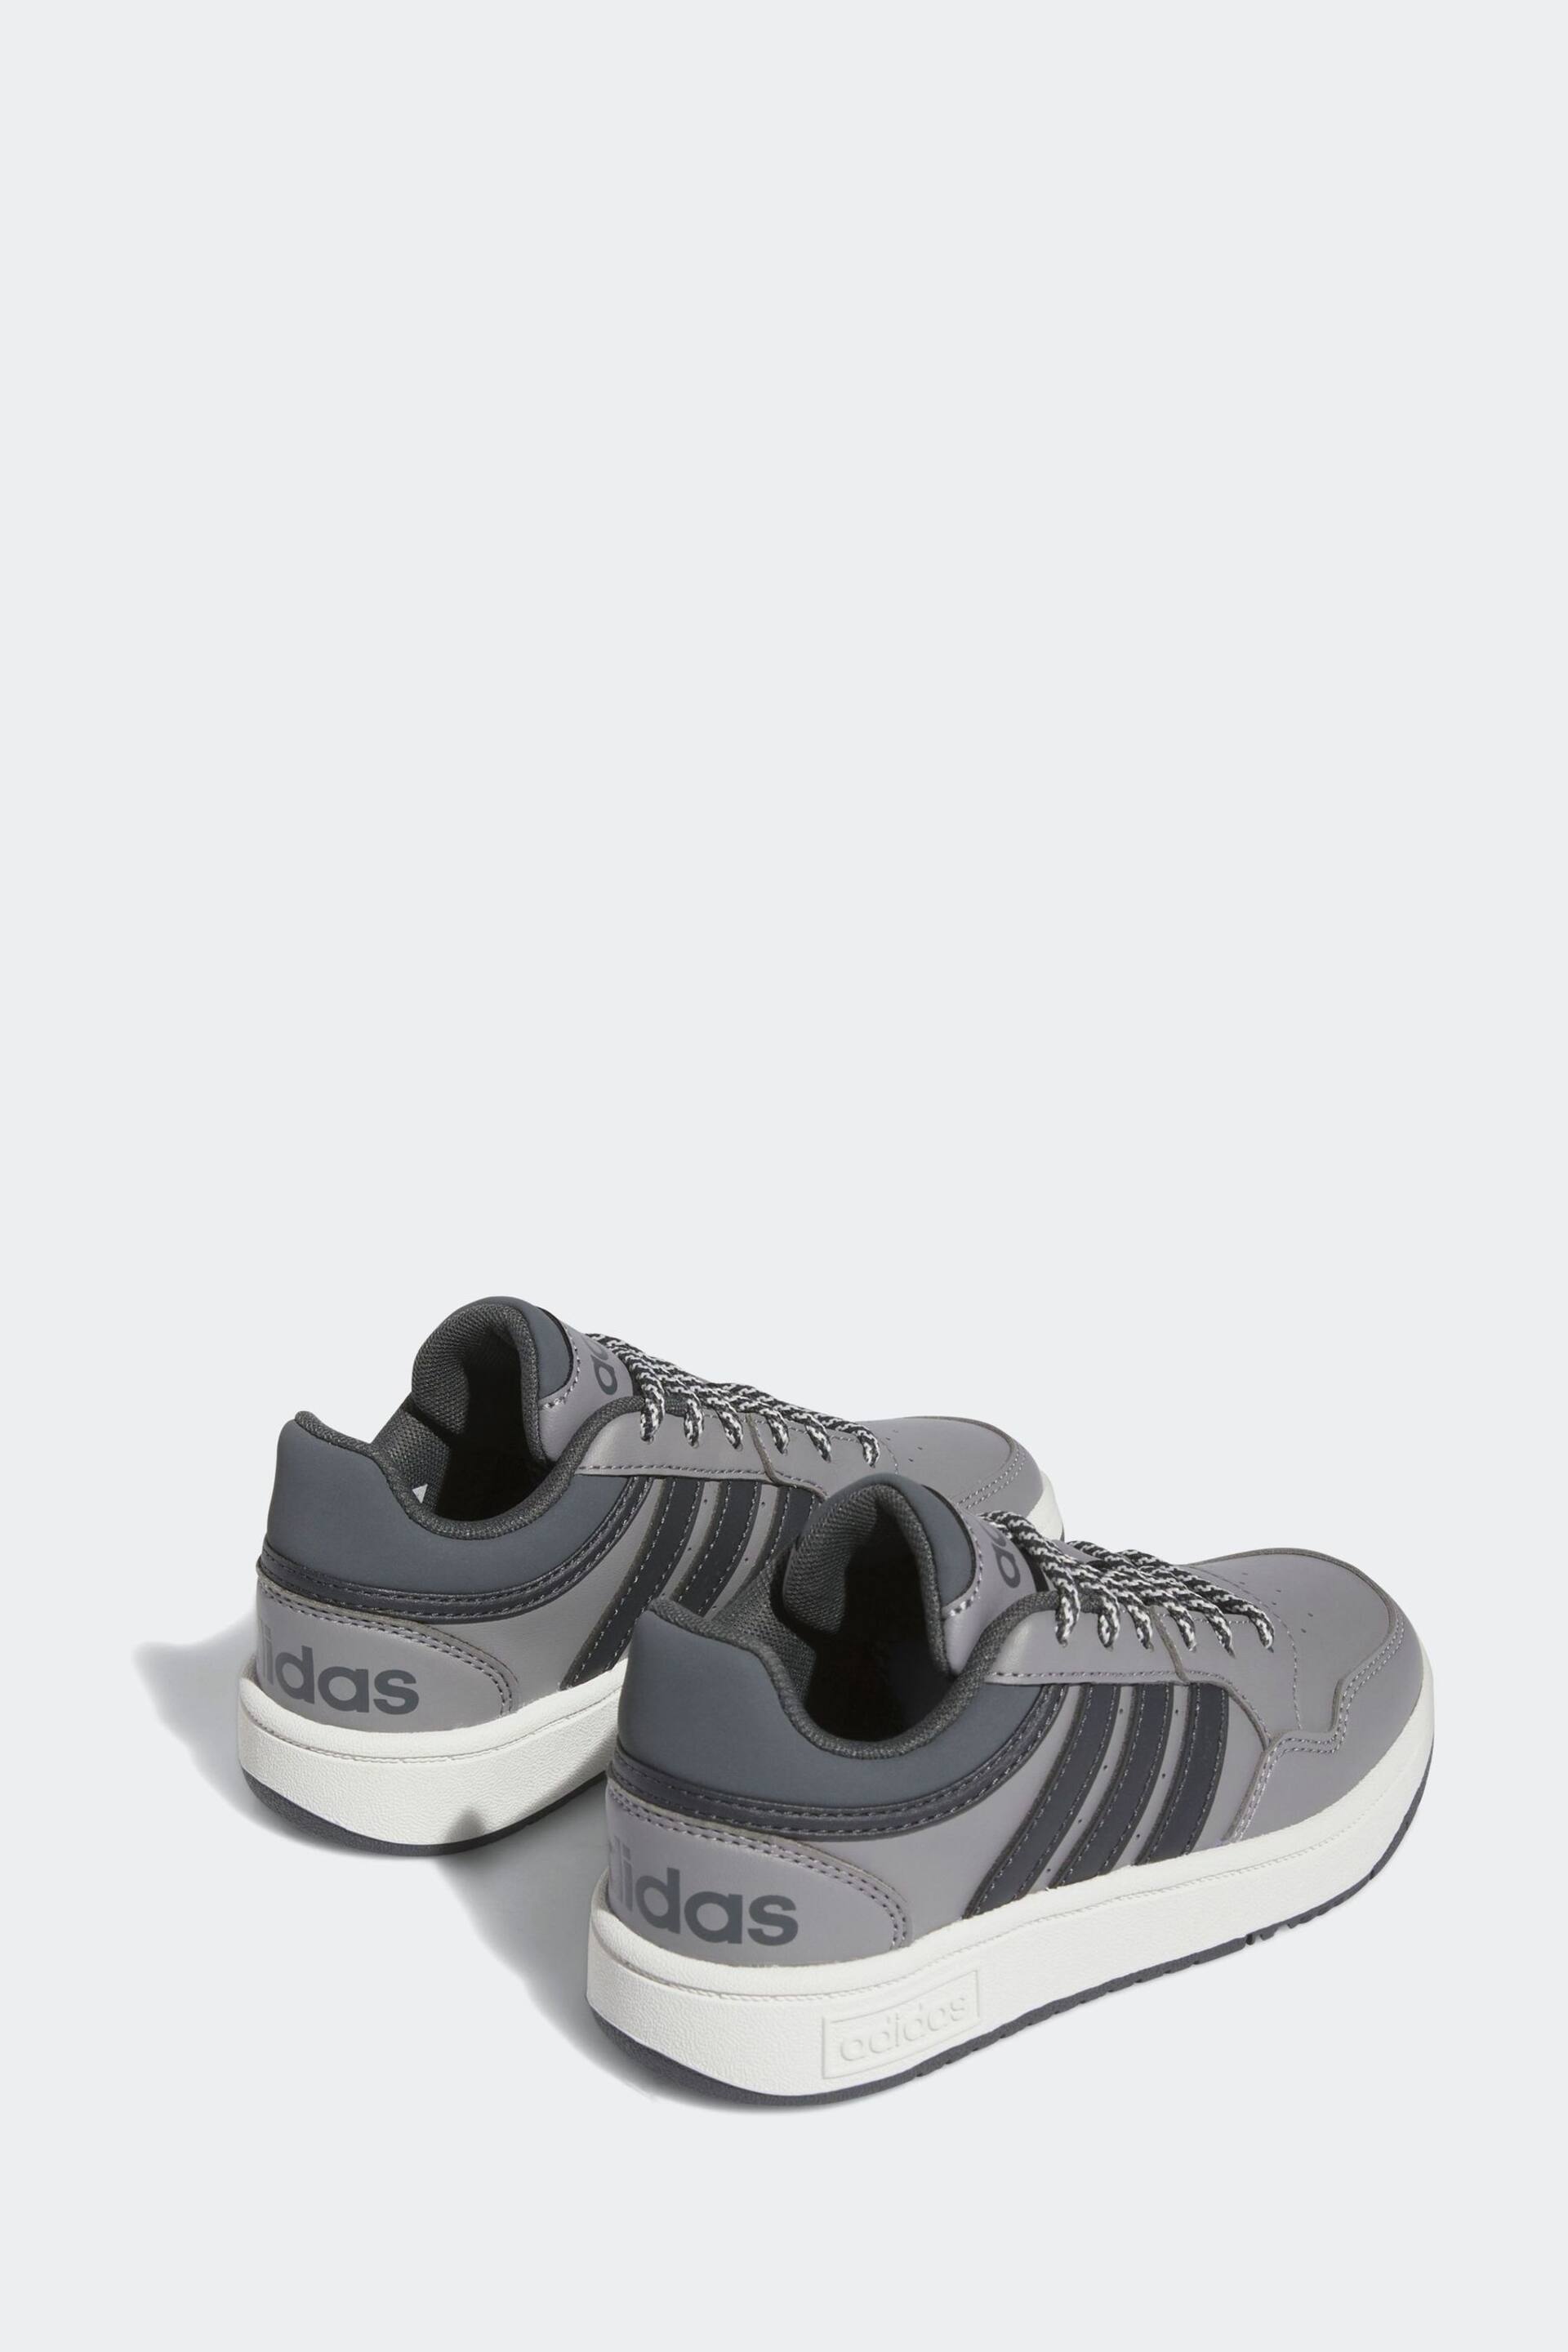 adidas Grey Hoops Trainers - Image 4 of 6